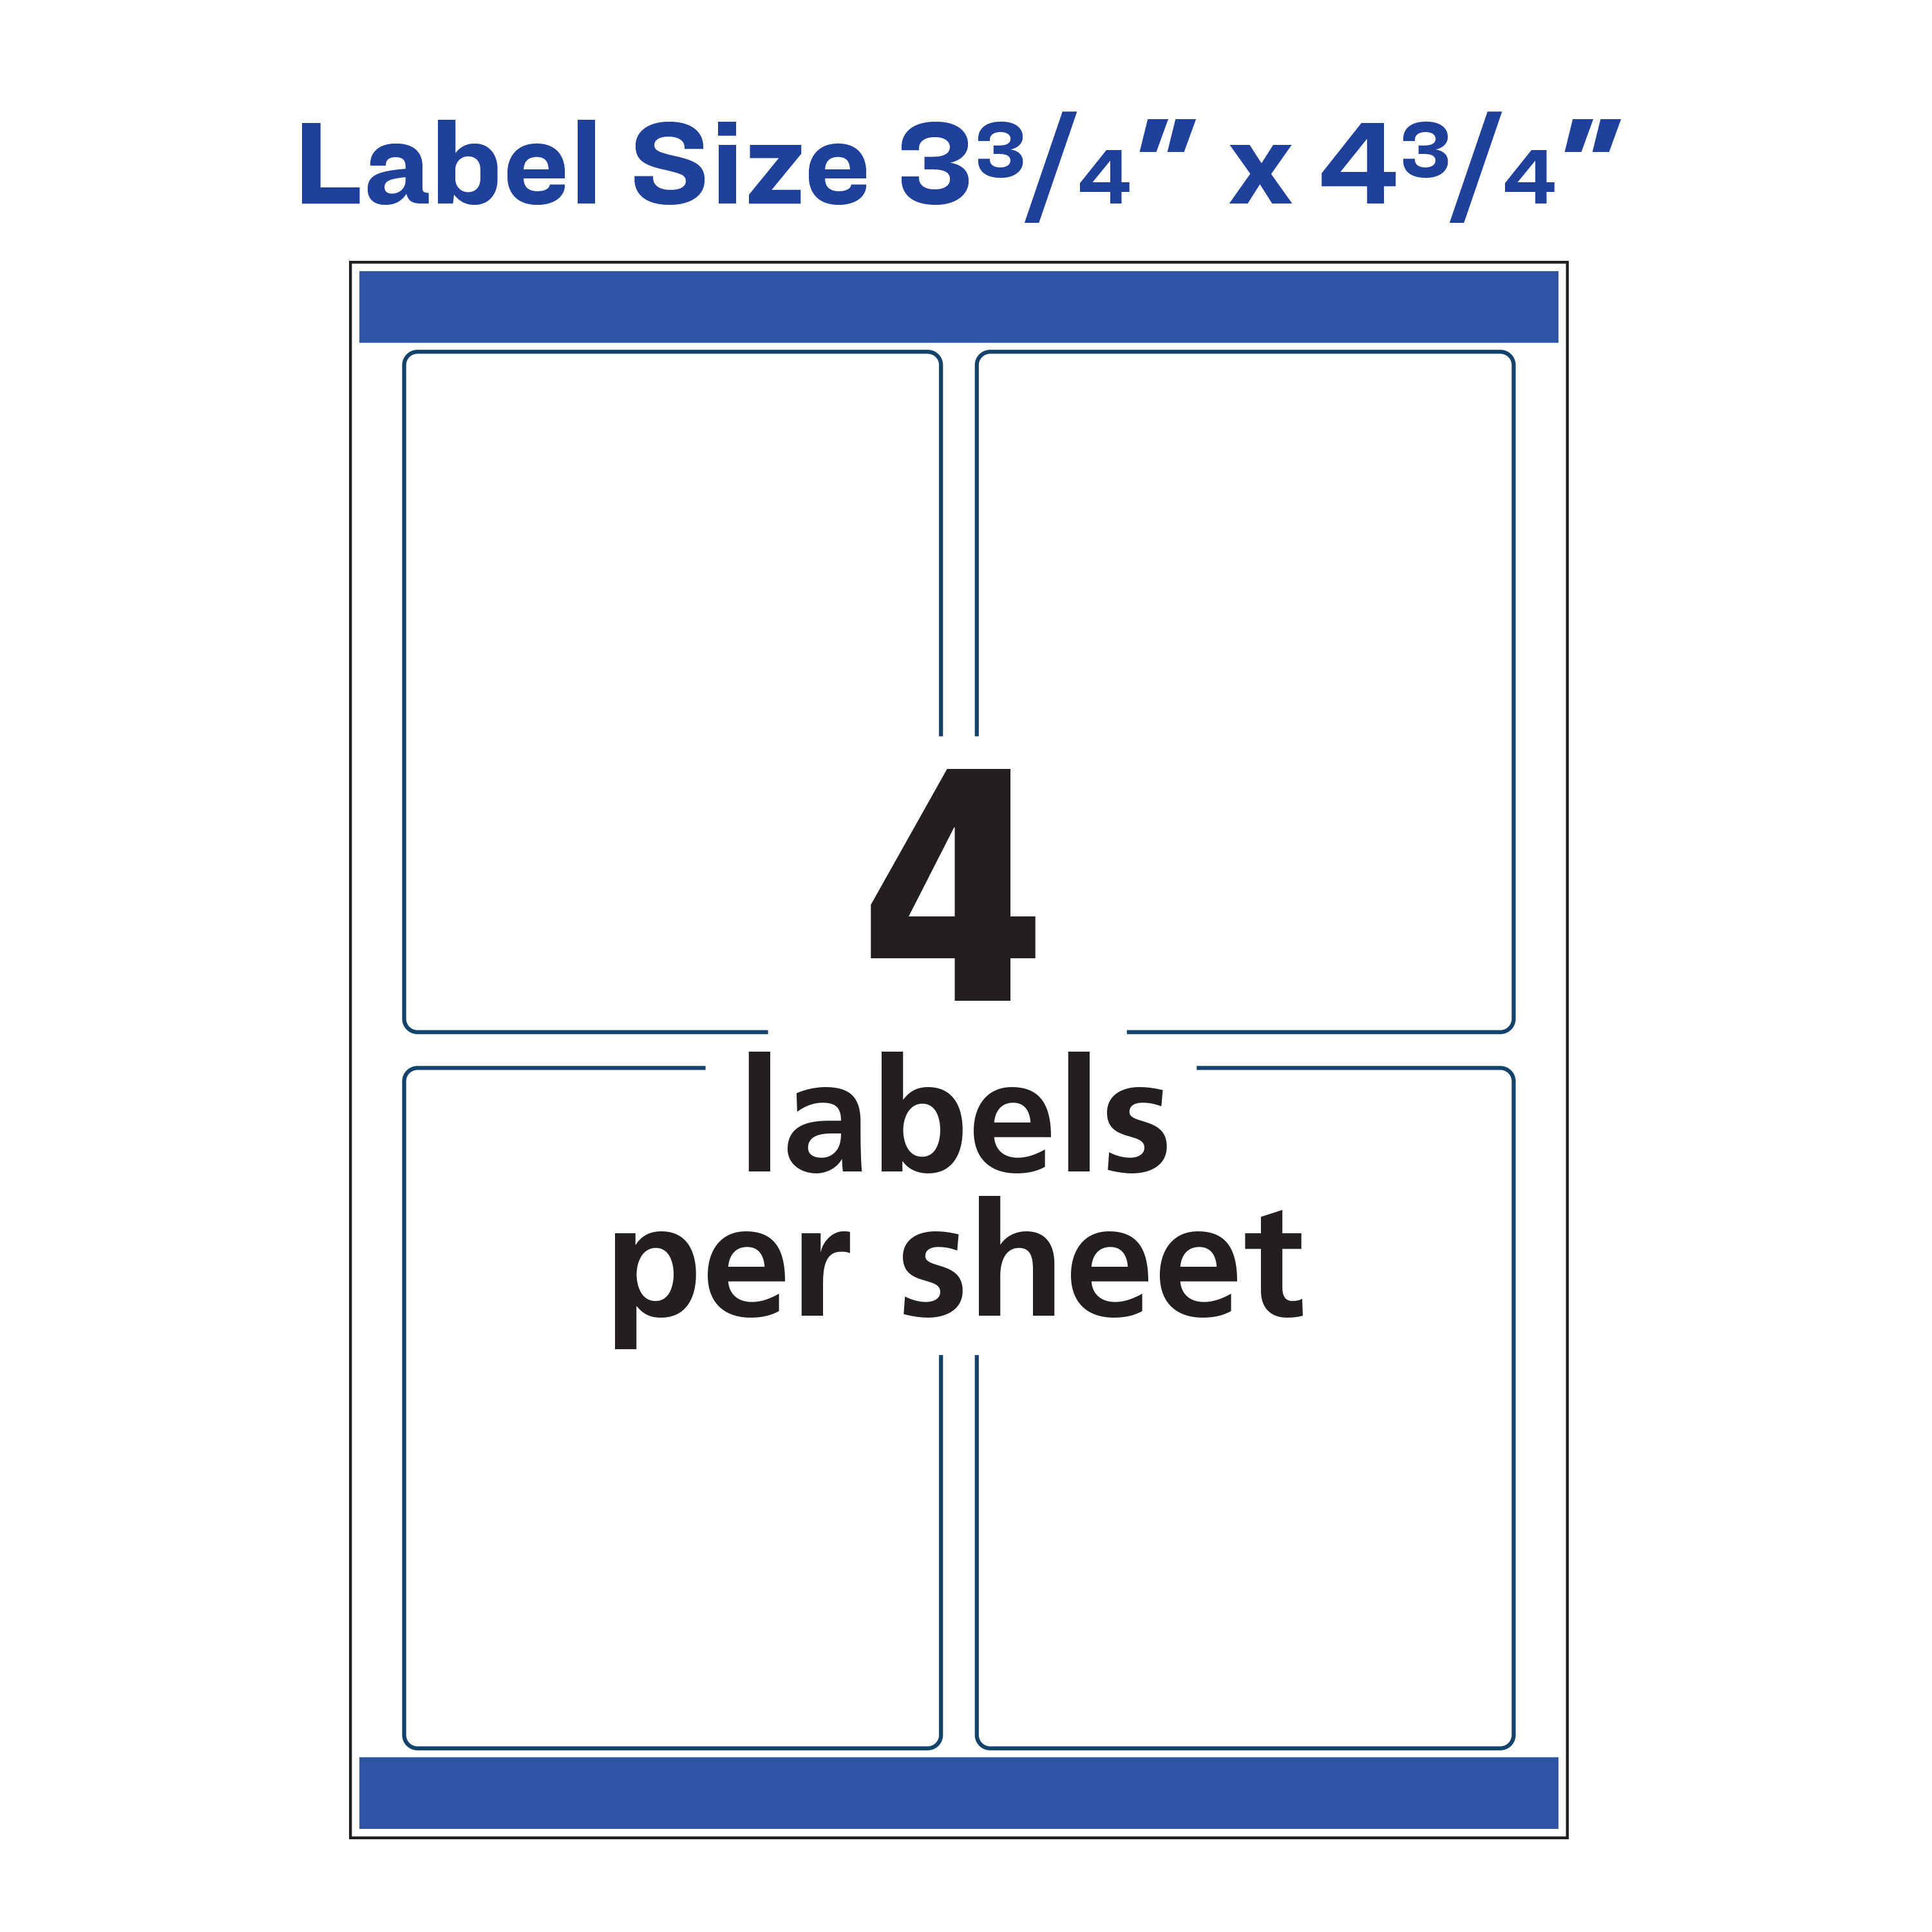 Avery Shipping Labels with Sure Feed for Color Laser Printers, Print-to-the-Edge, 3-3/4" x 4-3/4", 100 White Labels (6878) - image 5 of 9